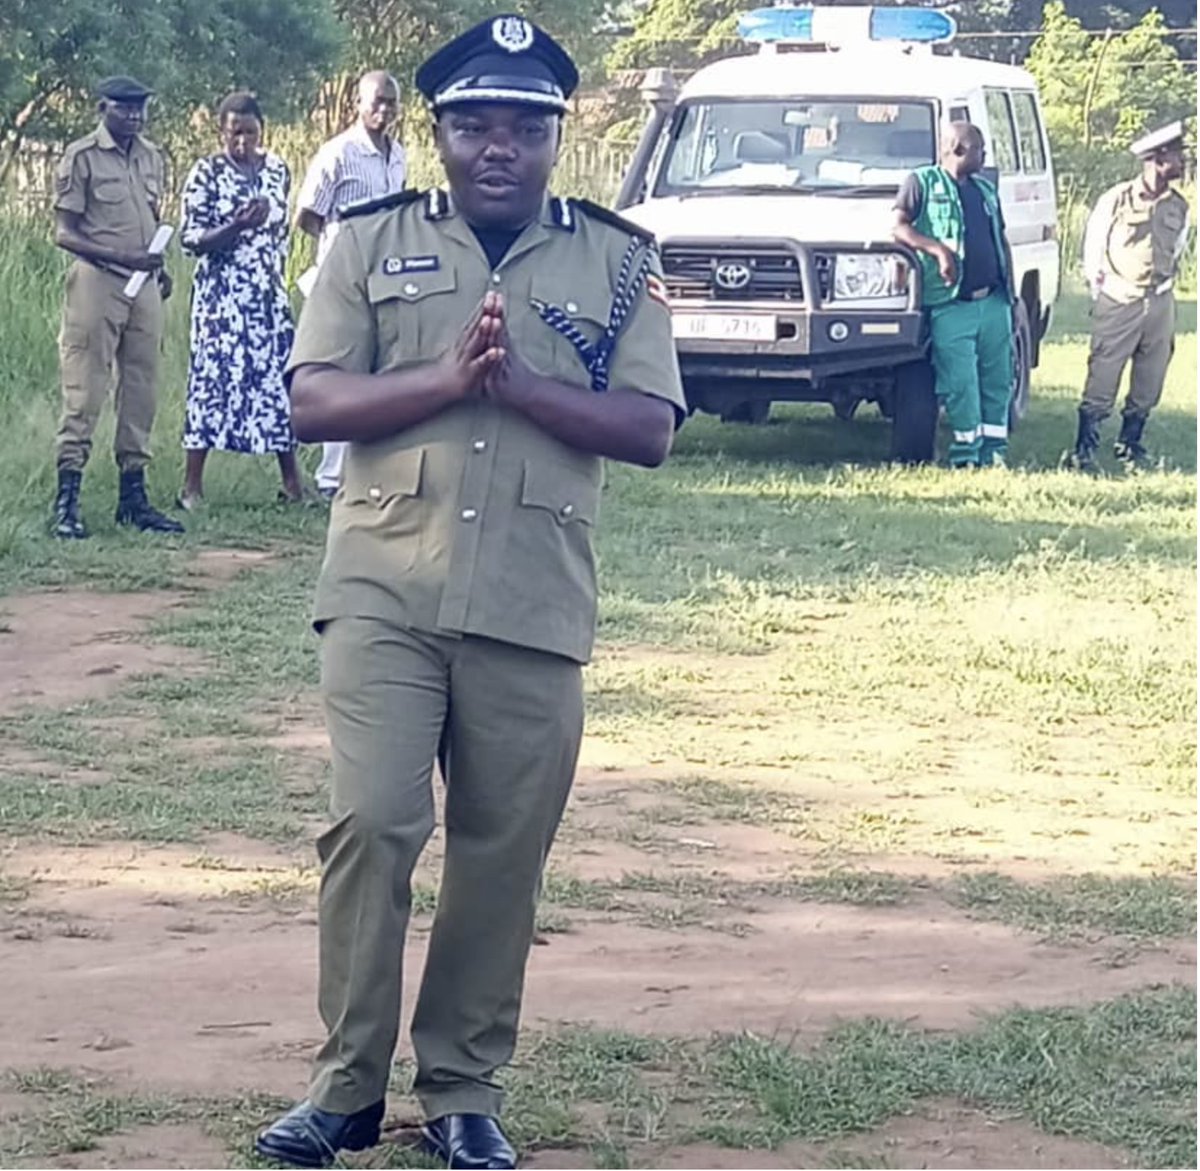 37 shortlisted candidates have turned up for Probationer Police Constable (PPC) interviews in West Nile (Nebbi District) at Nebbi Secondary School. The candidates have started with fitness tests and medical examinations

#NTVNews | 📸@Ugpolice.